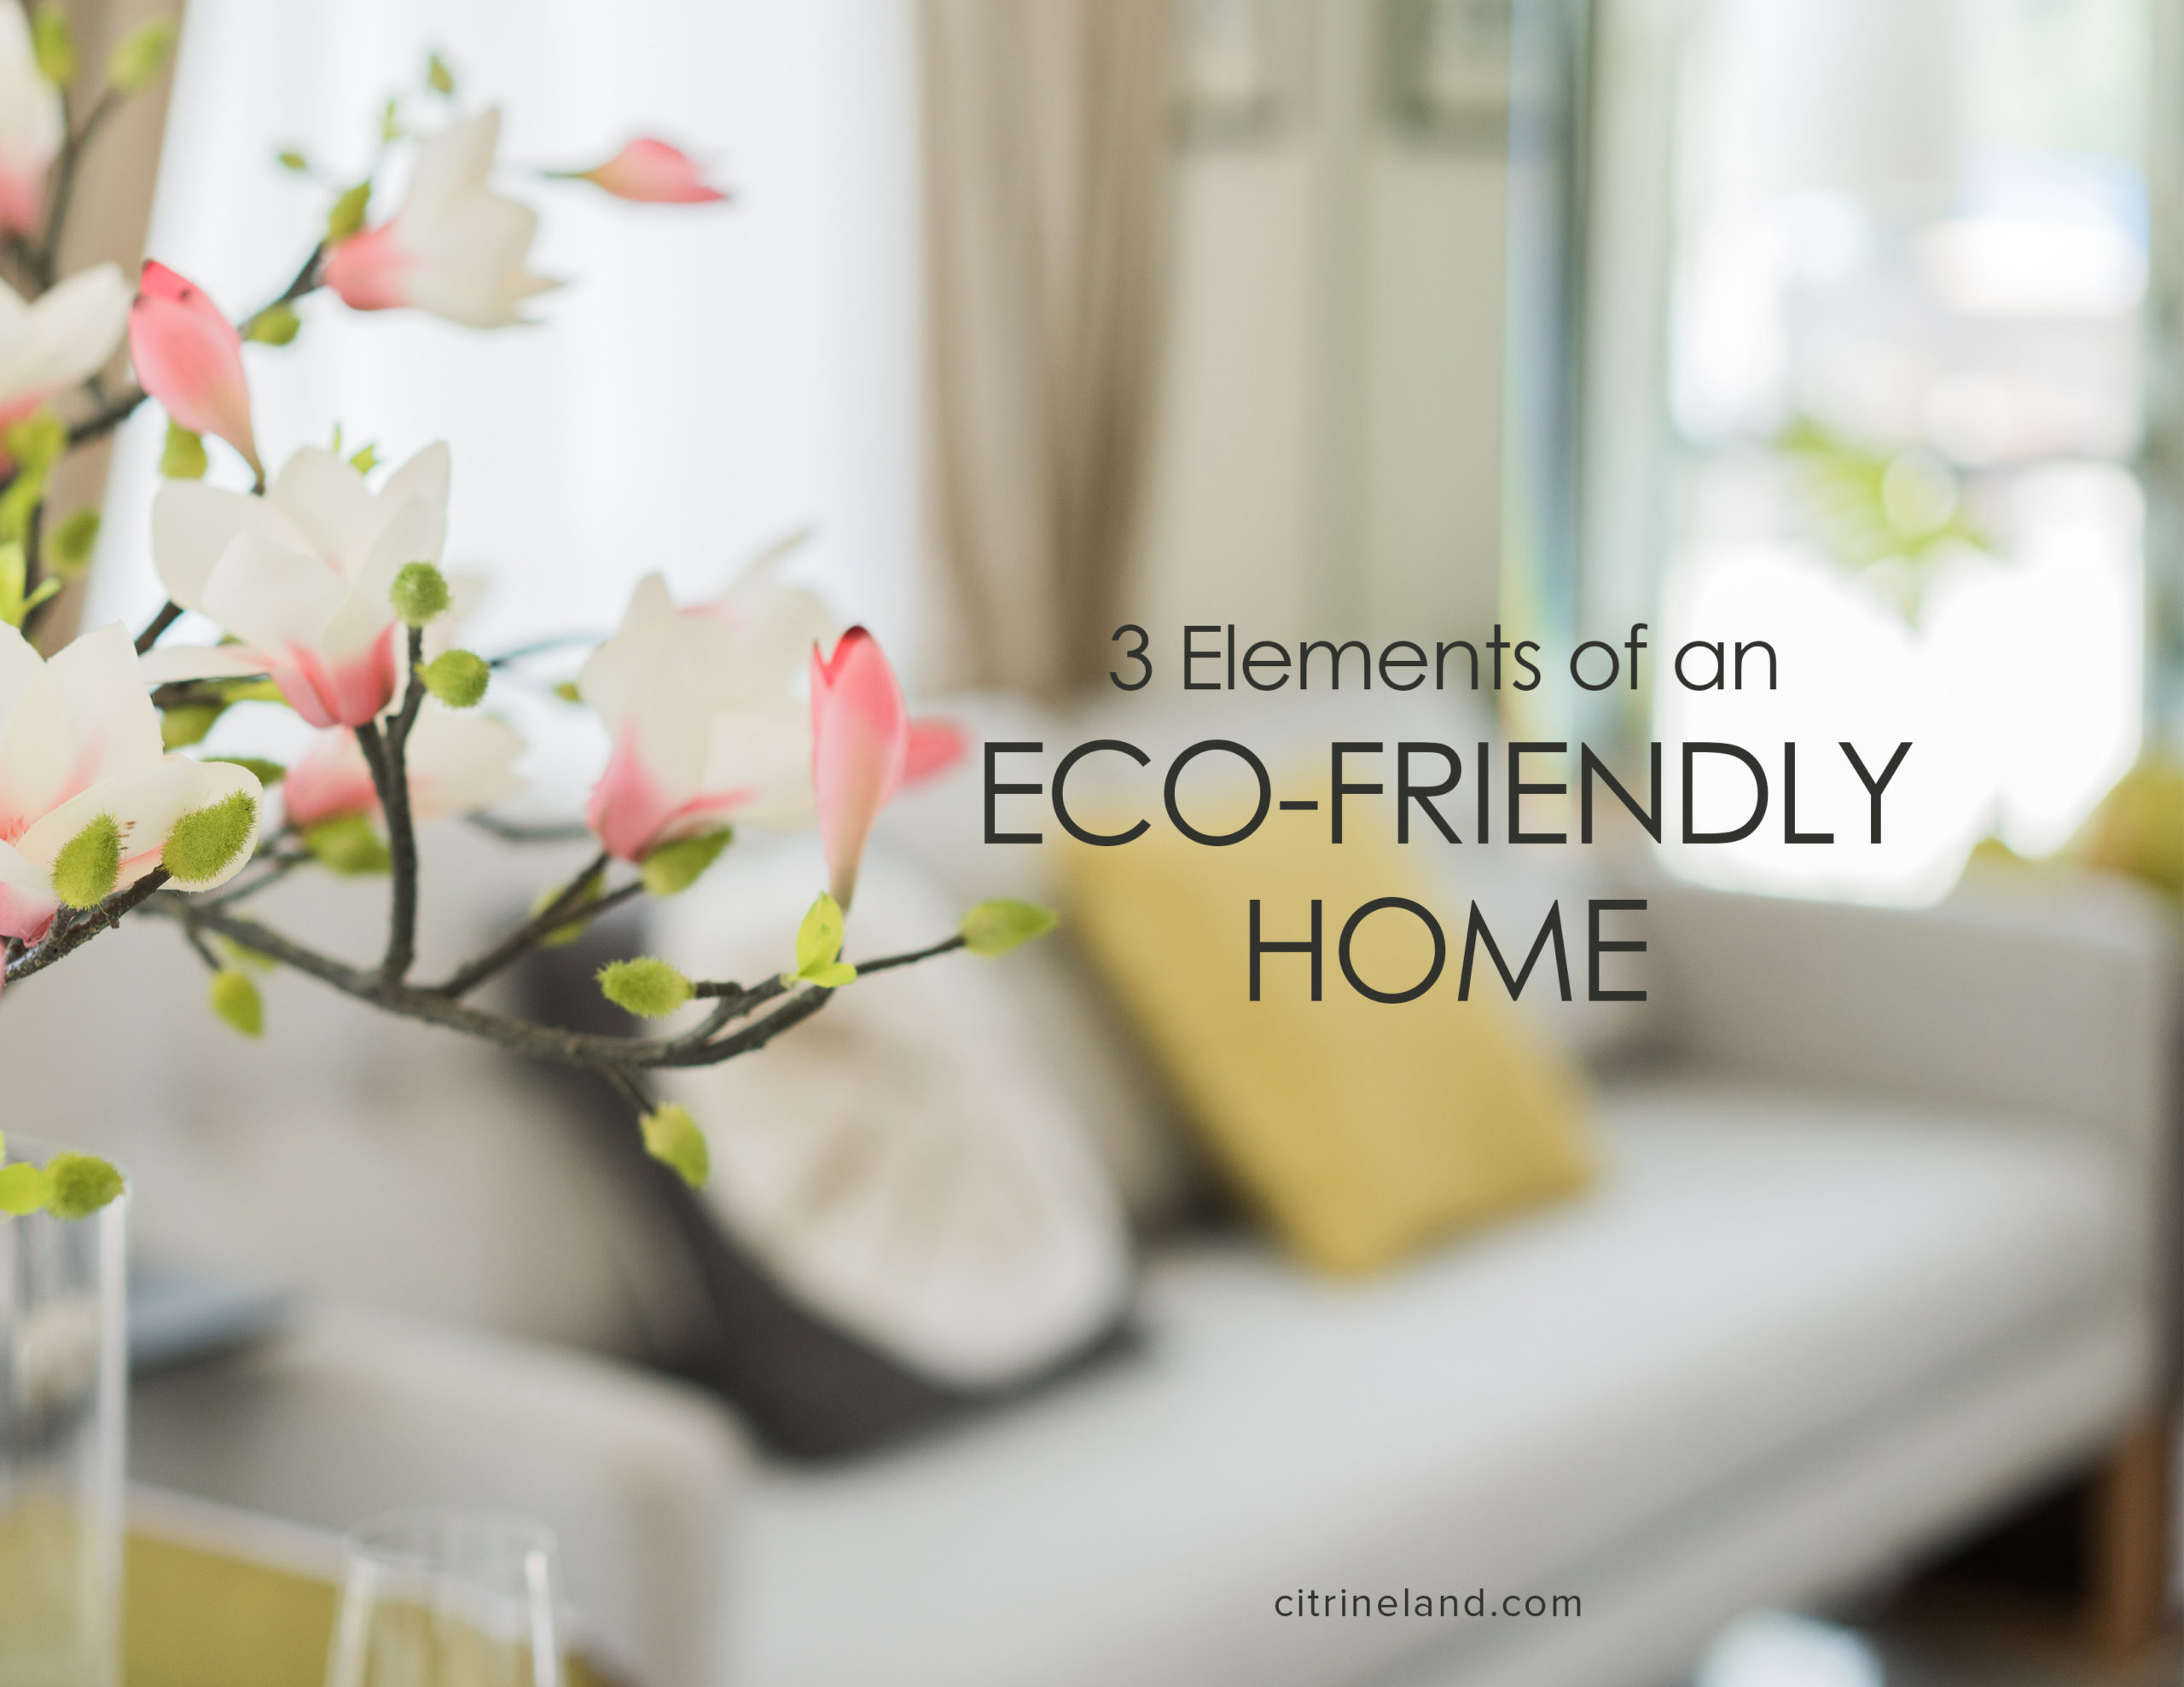 Looking For An Eco-Friendly Home? 3 Elements You Need To Consider